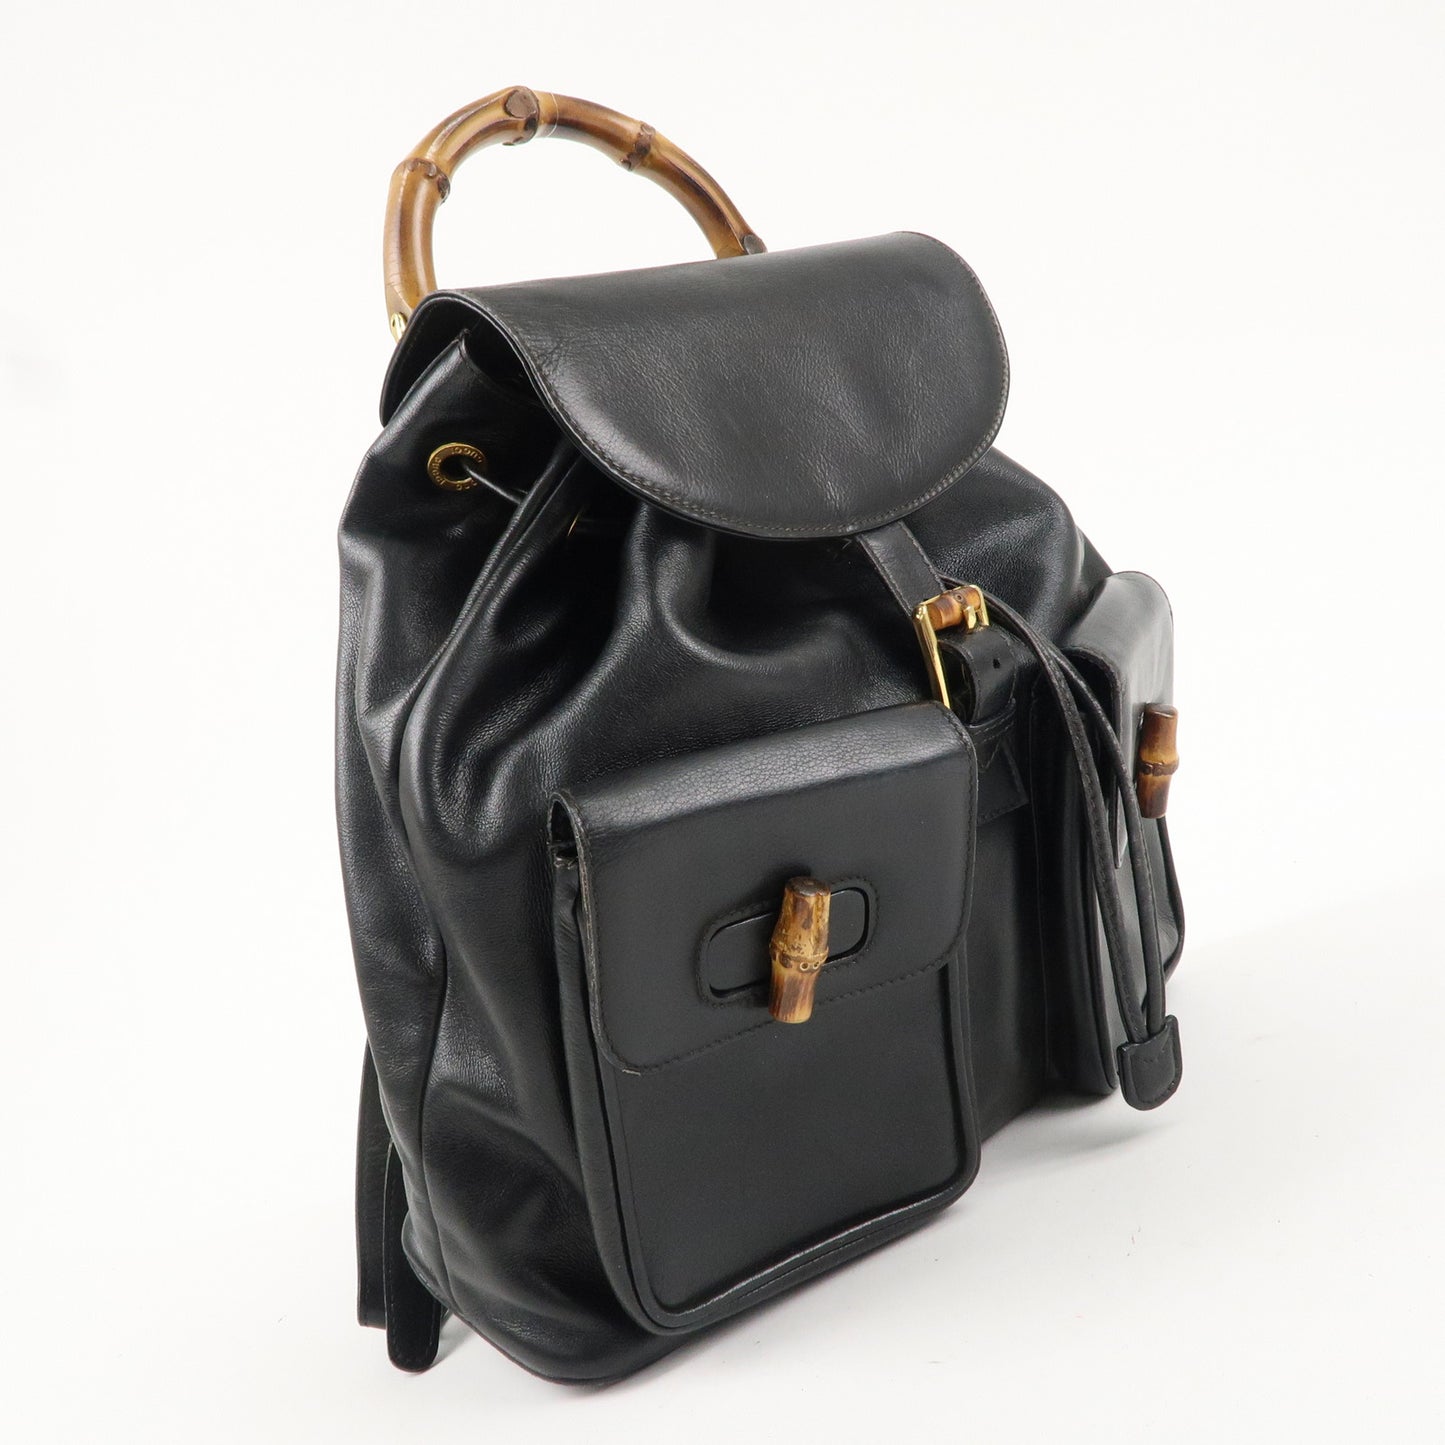 GUCCI Bamboo Leather Back Pack Black Ruck Sack 003.2058.0016